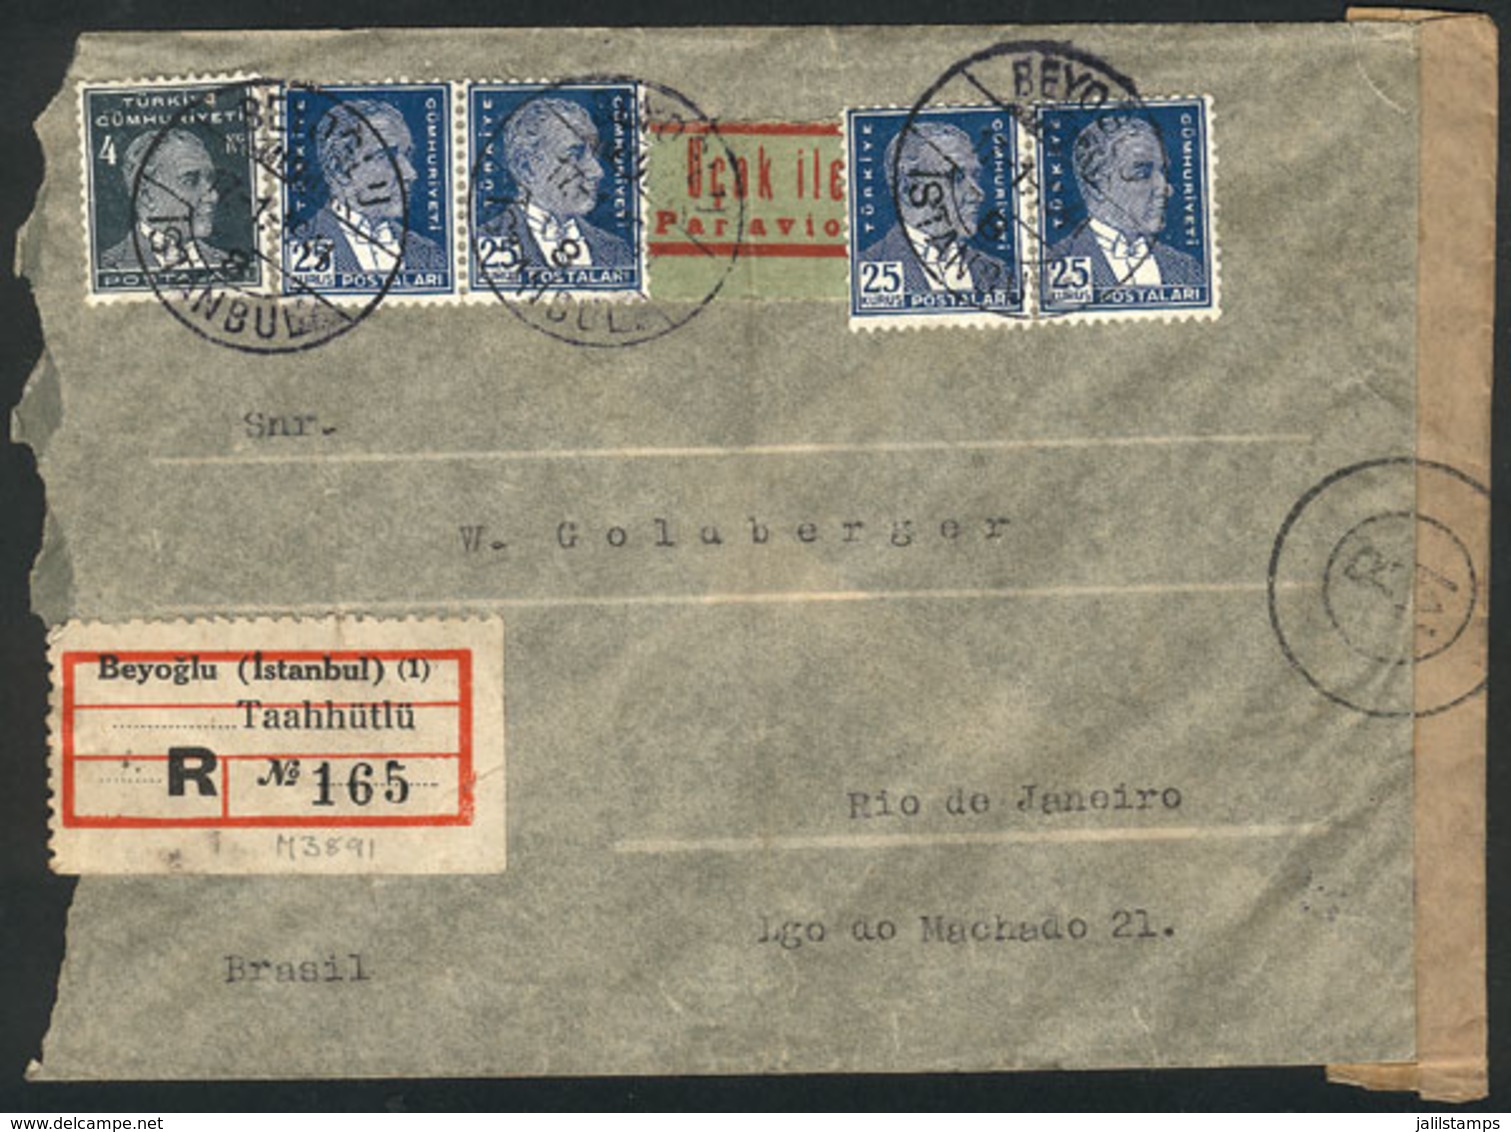 TURKEY: Registered Airmail Cover Sent From BEYOGLU To Rio De Janeiro On 17/JA/1941, Censored, Unusual Destination, Very  - Covers & Documents